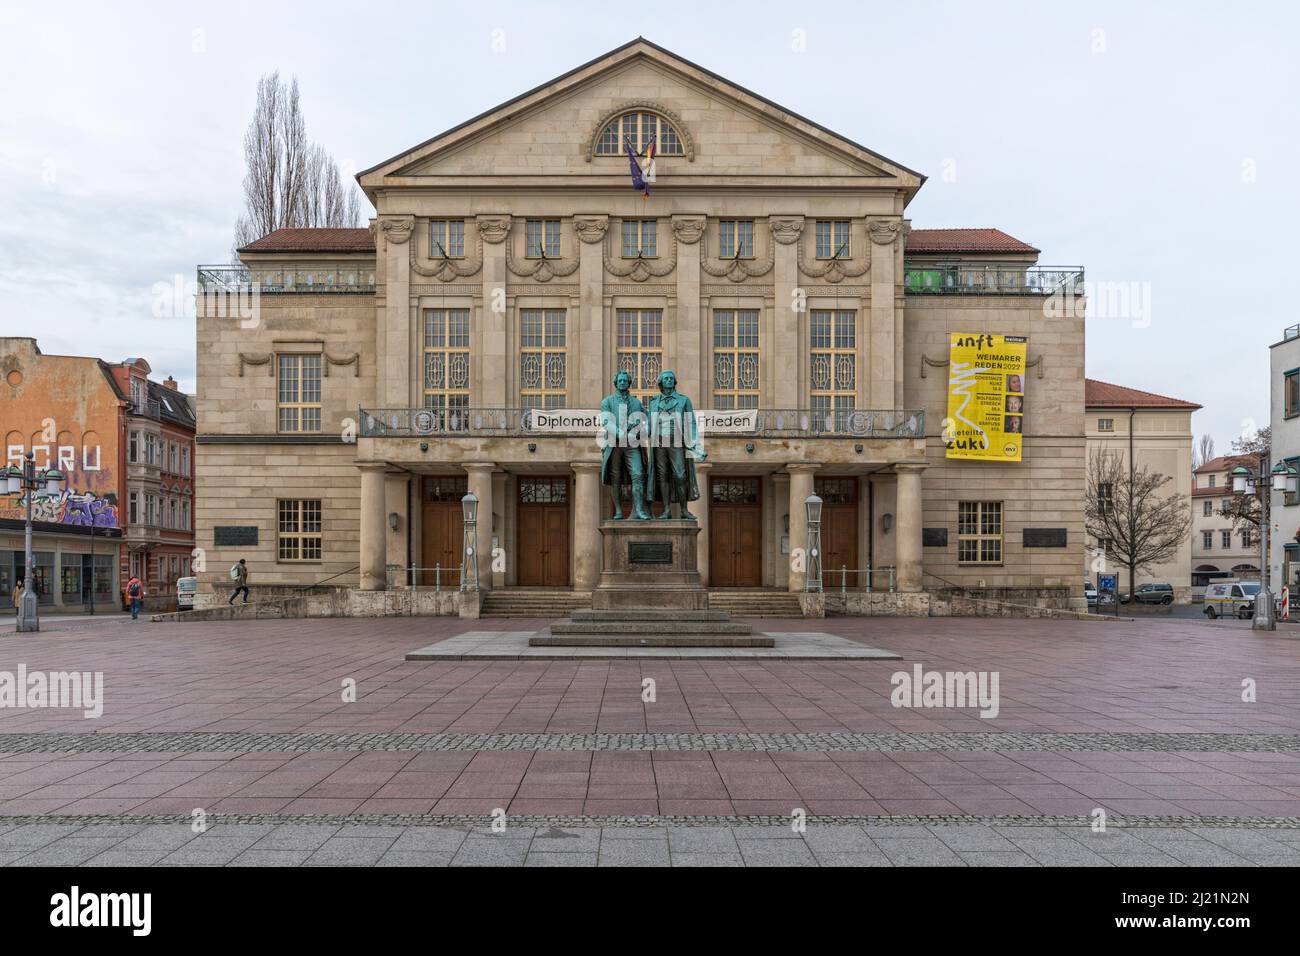 National Theatre with monument for Johann Wolfgang von Goethe and Friedrich Schiller at Weimar, Thuringia, Germany Stock Photo